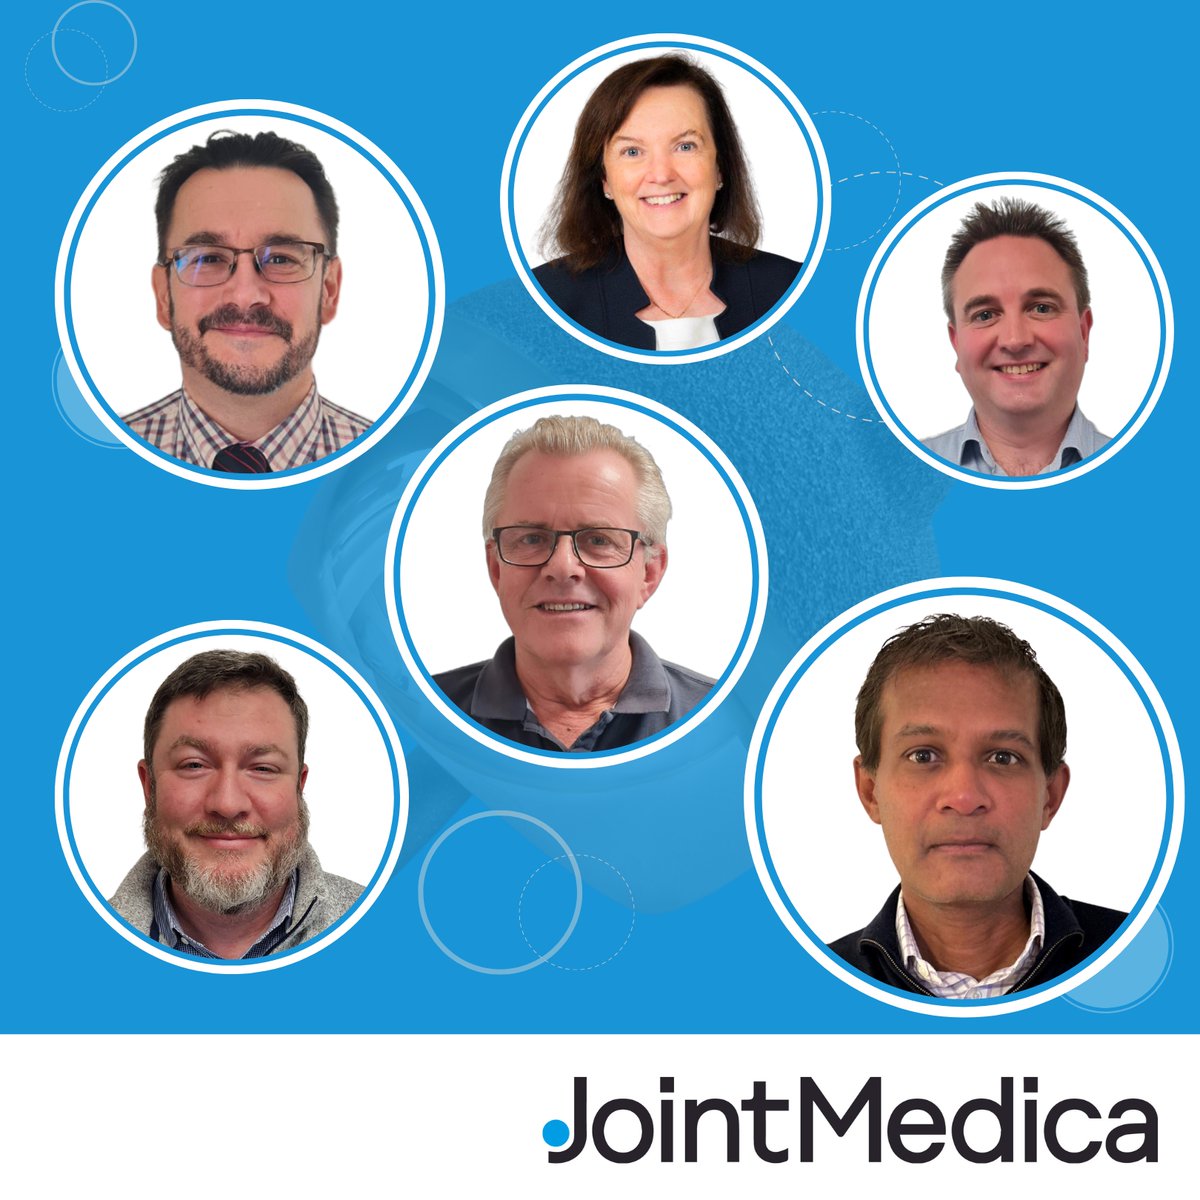 We are delighted to share exciting news about recent developments at JointMedica, marking a significant chapter in our company's growth and strategic direction. JointMedica proudly announces the appointment of @DrSharatKusuma as President, and Peggy Taylor as Senior Executive